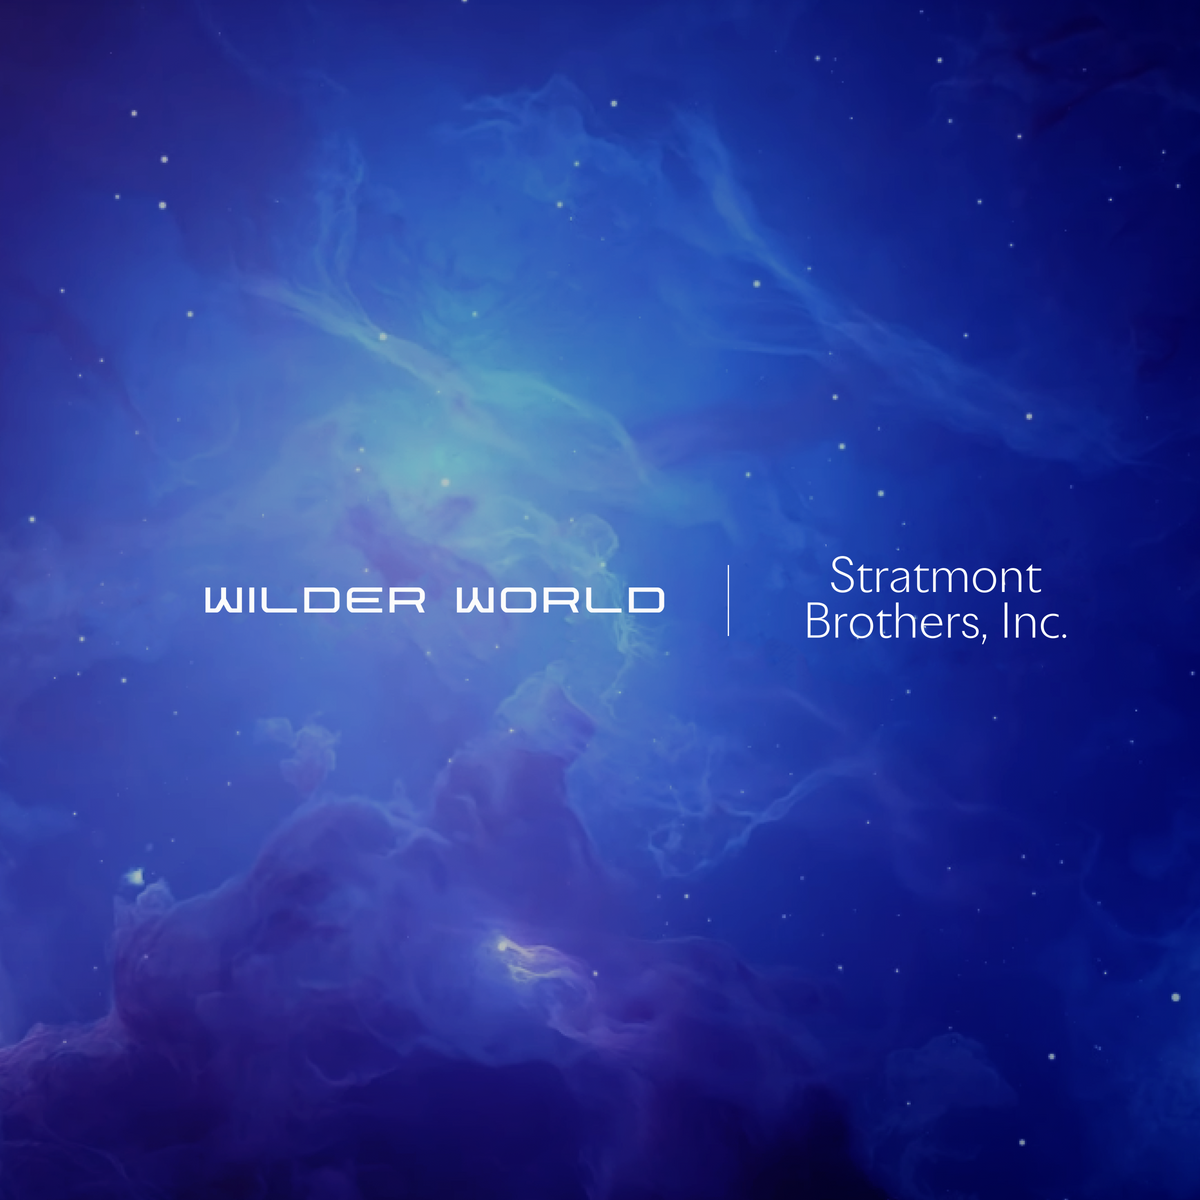 Welcome to Wilder World: Stratmont Brothers Inc